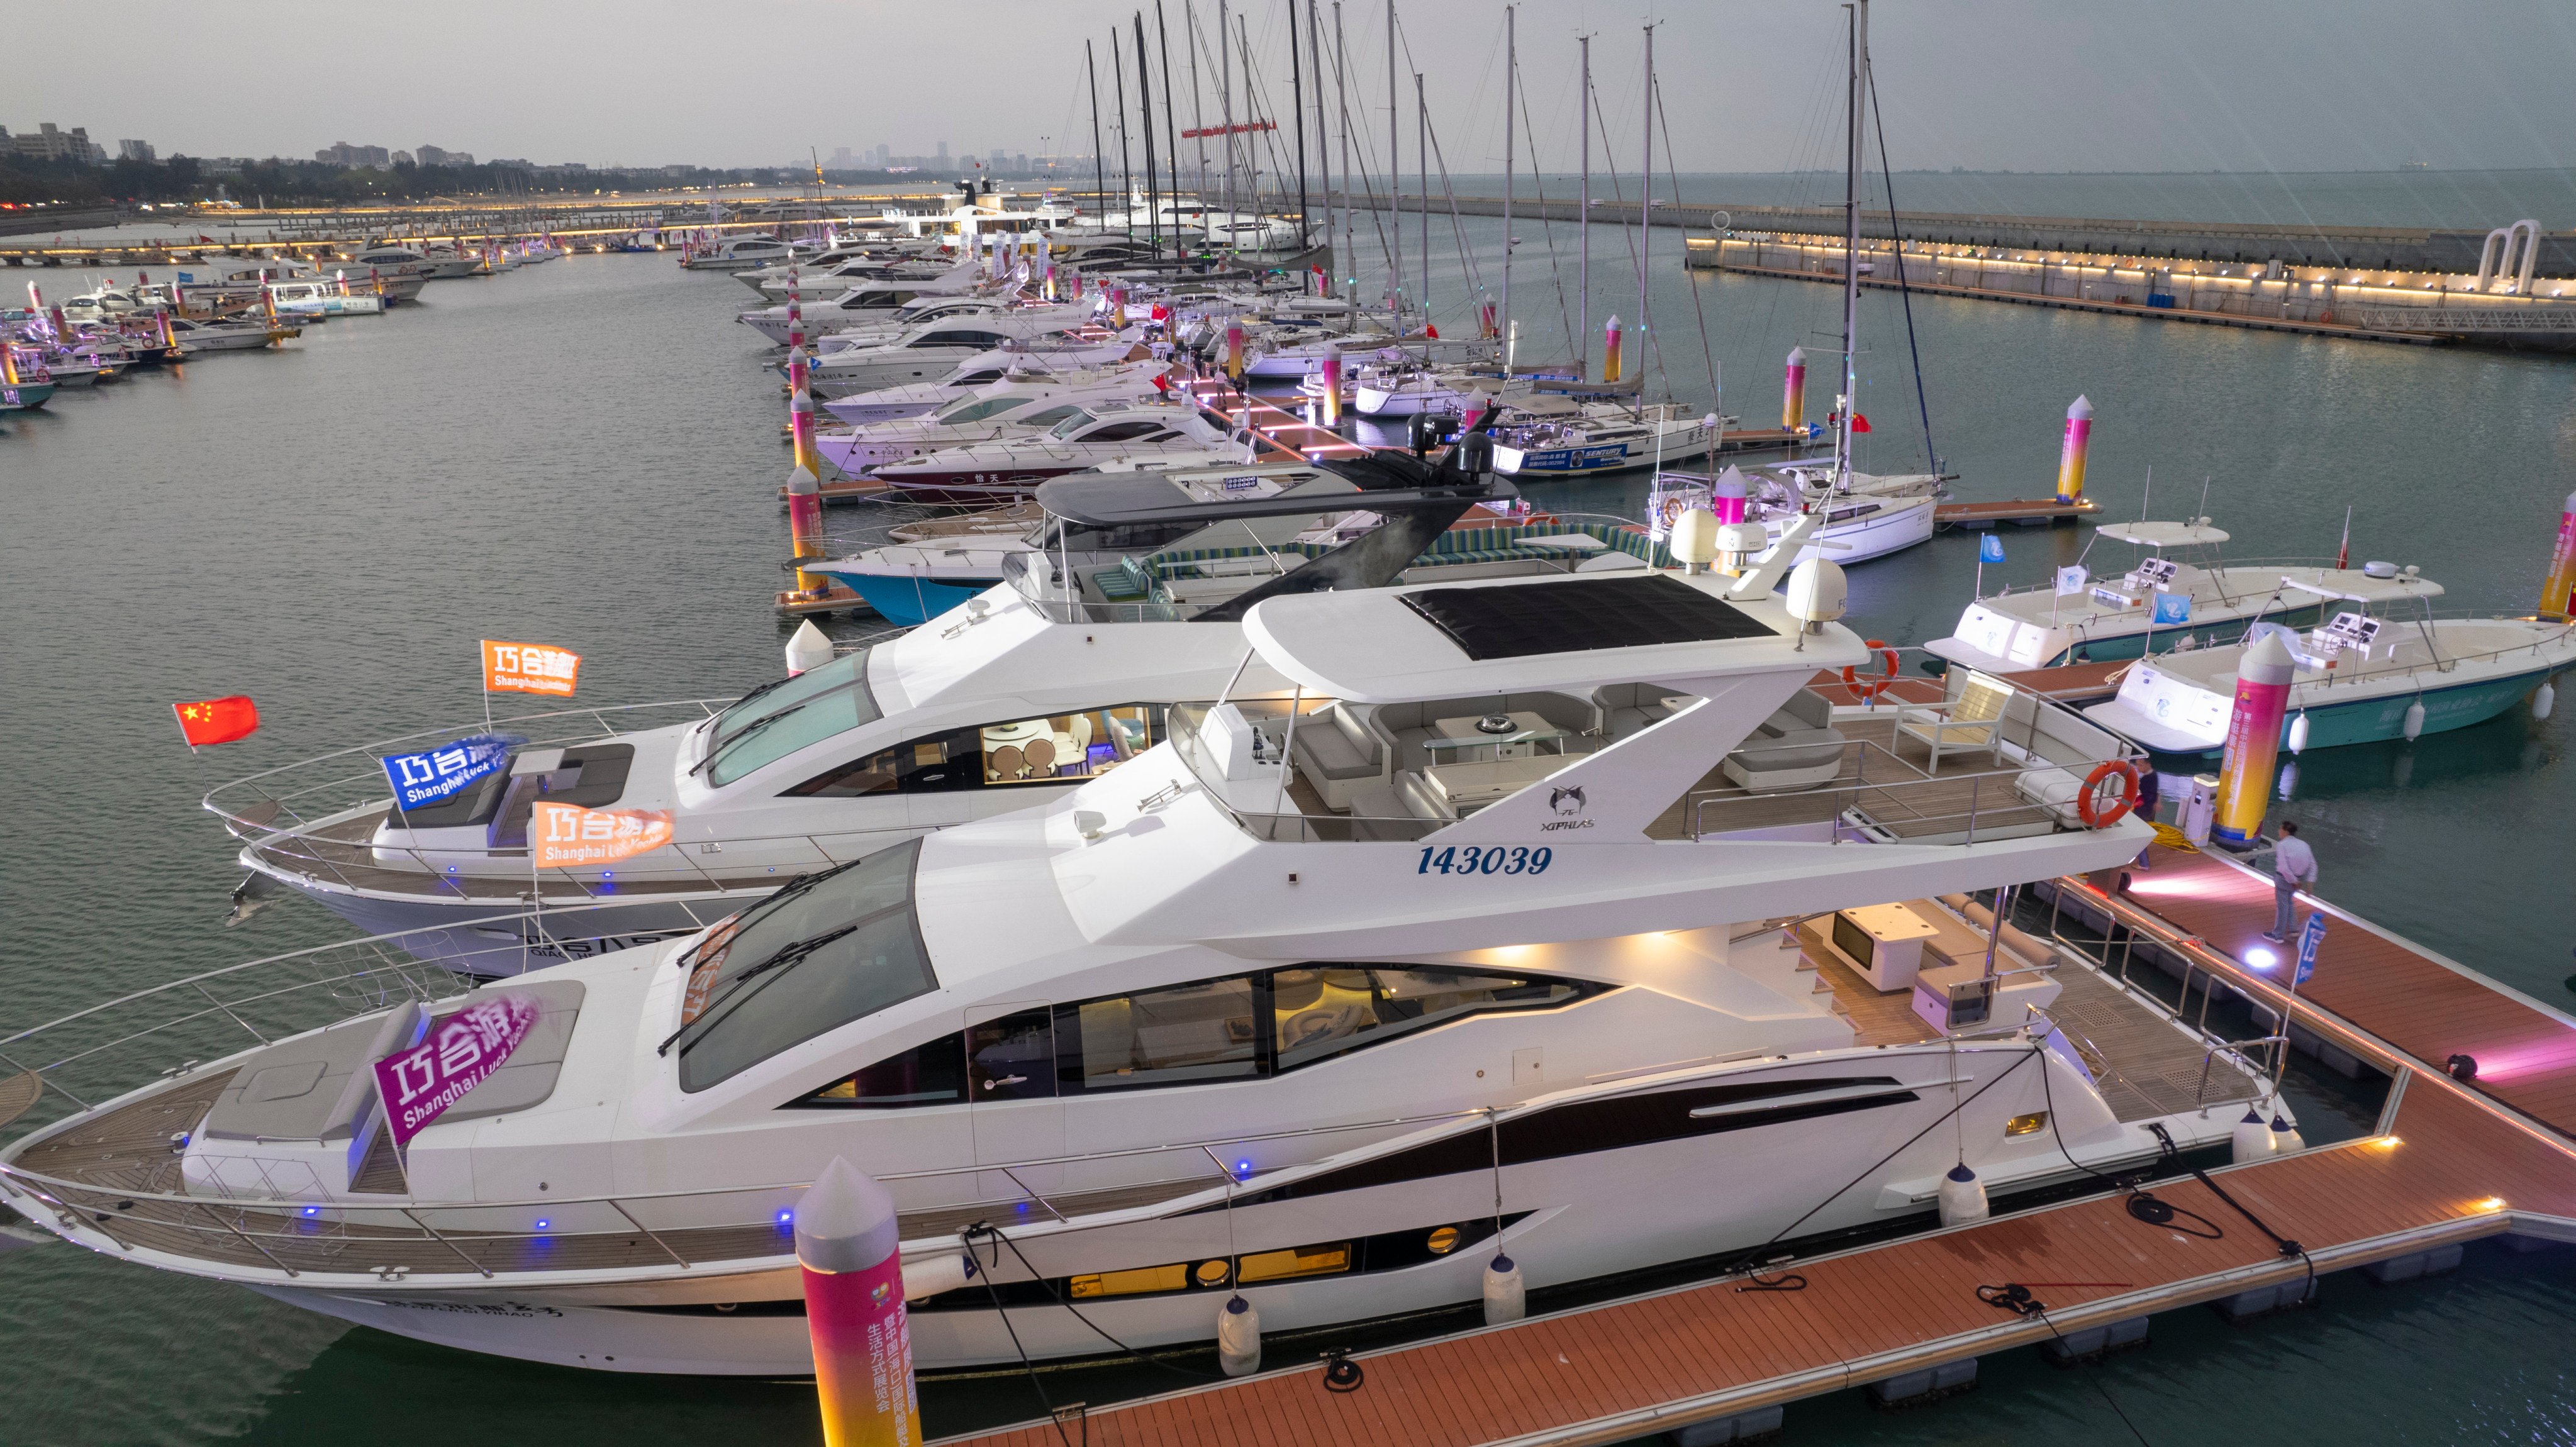 Yachts are moored at the public dock of the Haikou National Sailing Base in Haikou, Hainan province, on Tuesday during the third China International Consumer Products Expo. Photo: Getty Images